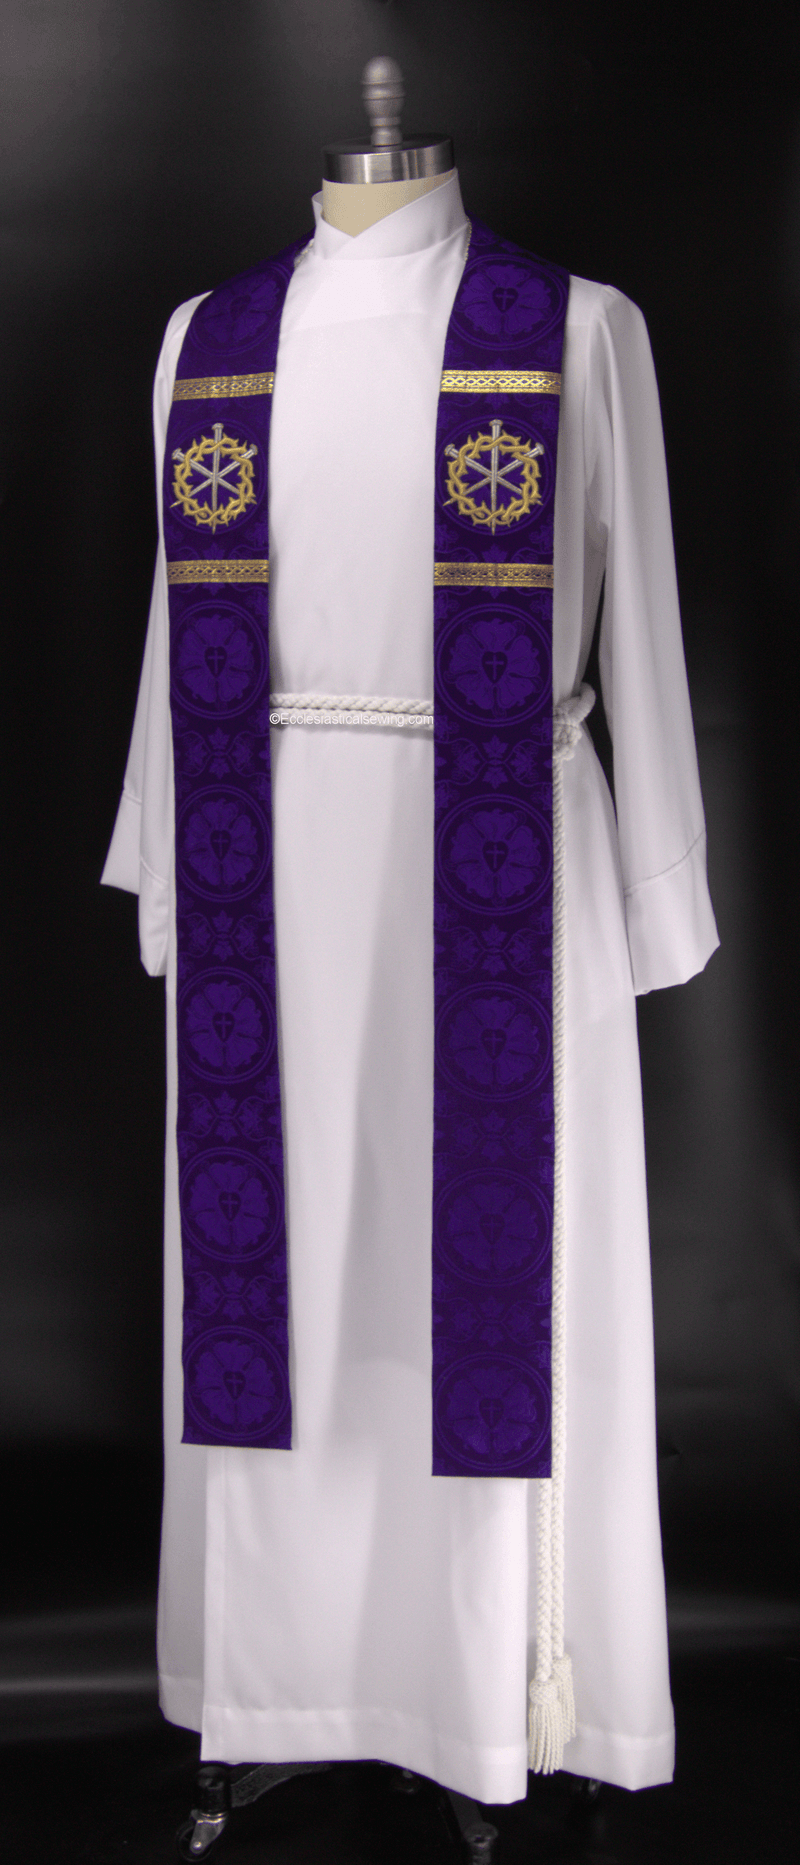 files/pastor-or-priest-stole-or-crown-of-thorns-lent-stole-ecclesiastical-sewing-2-31790300037376.png